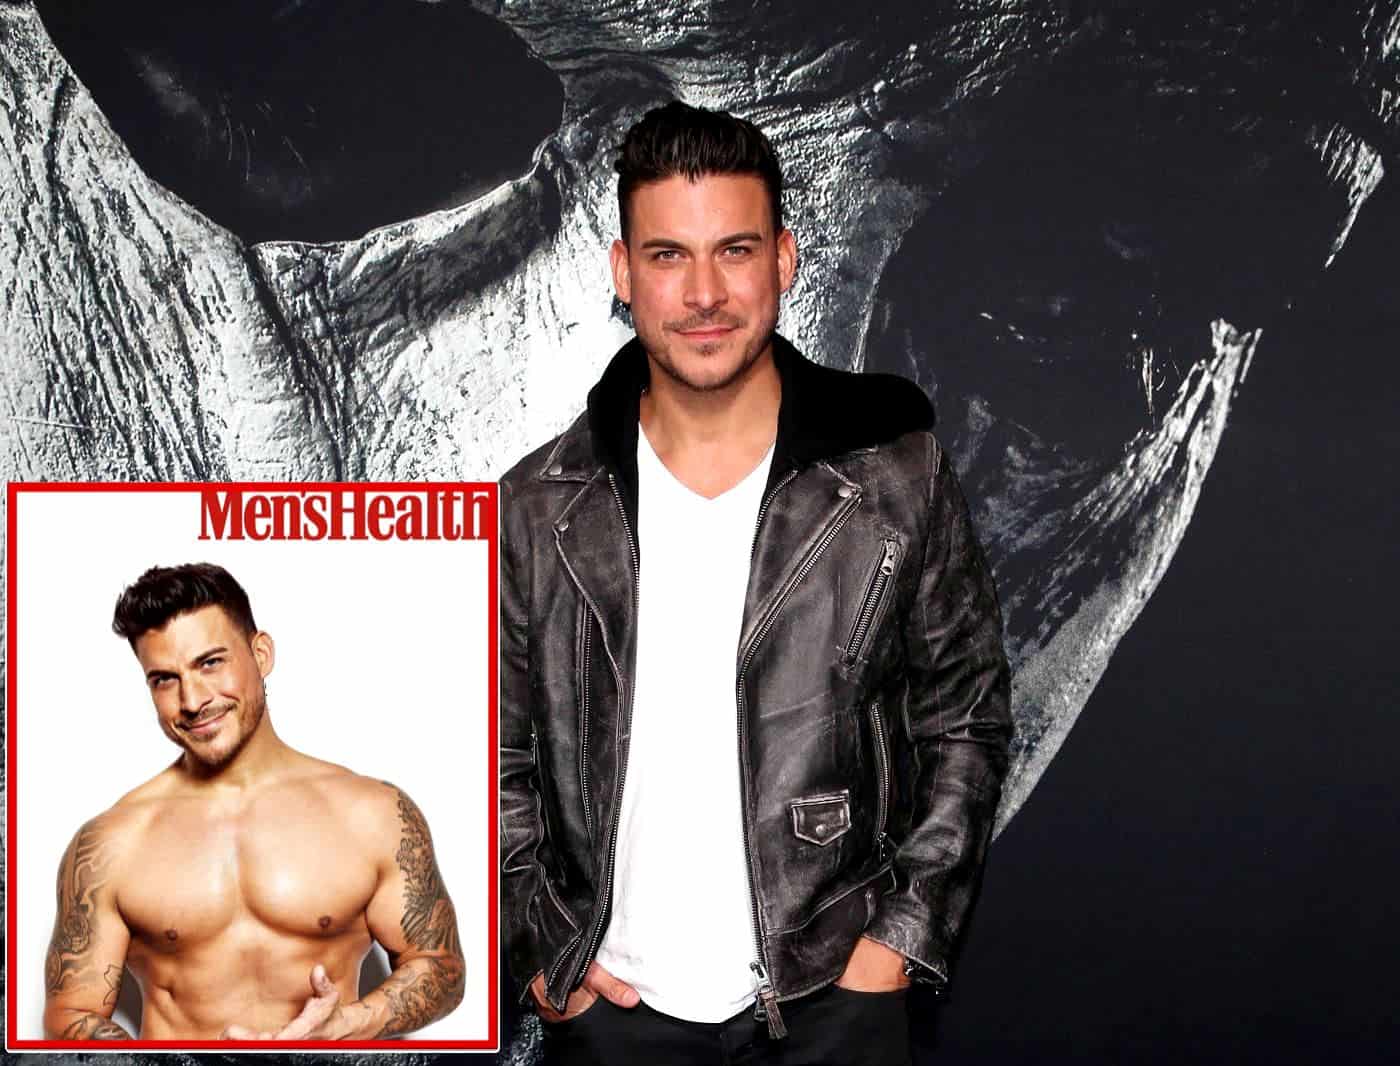 Vanderpump Rules Jax Taylor talks Wanting to Self-harm with Drugs & How he Lost 42 Pounds